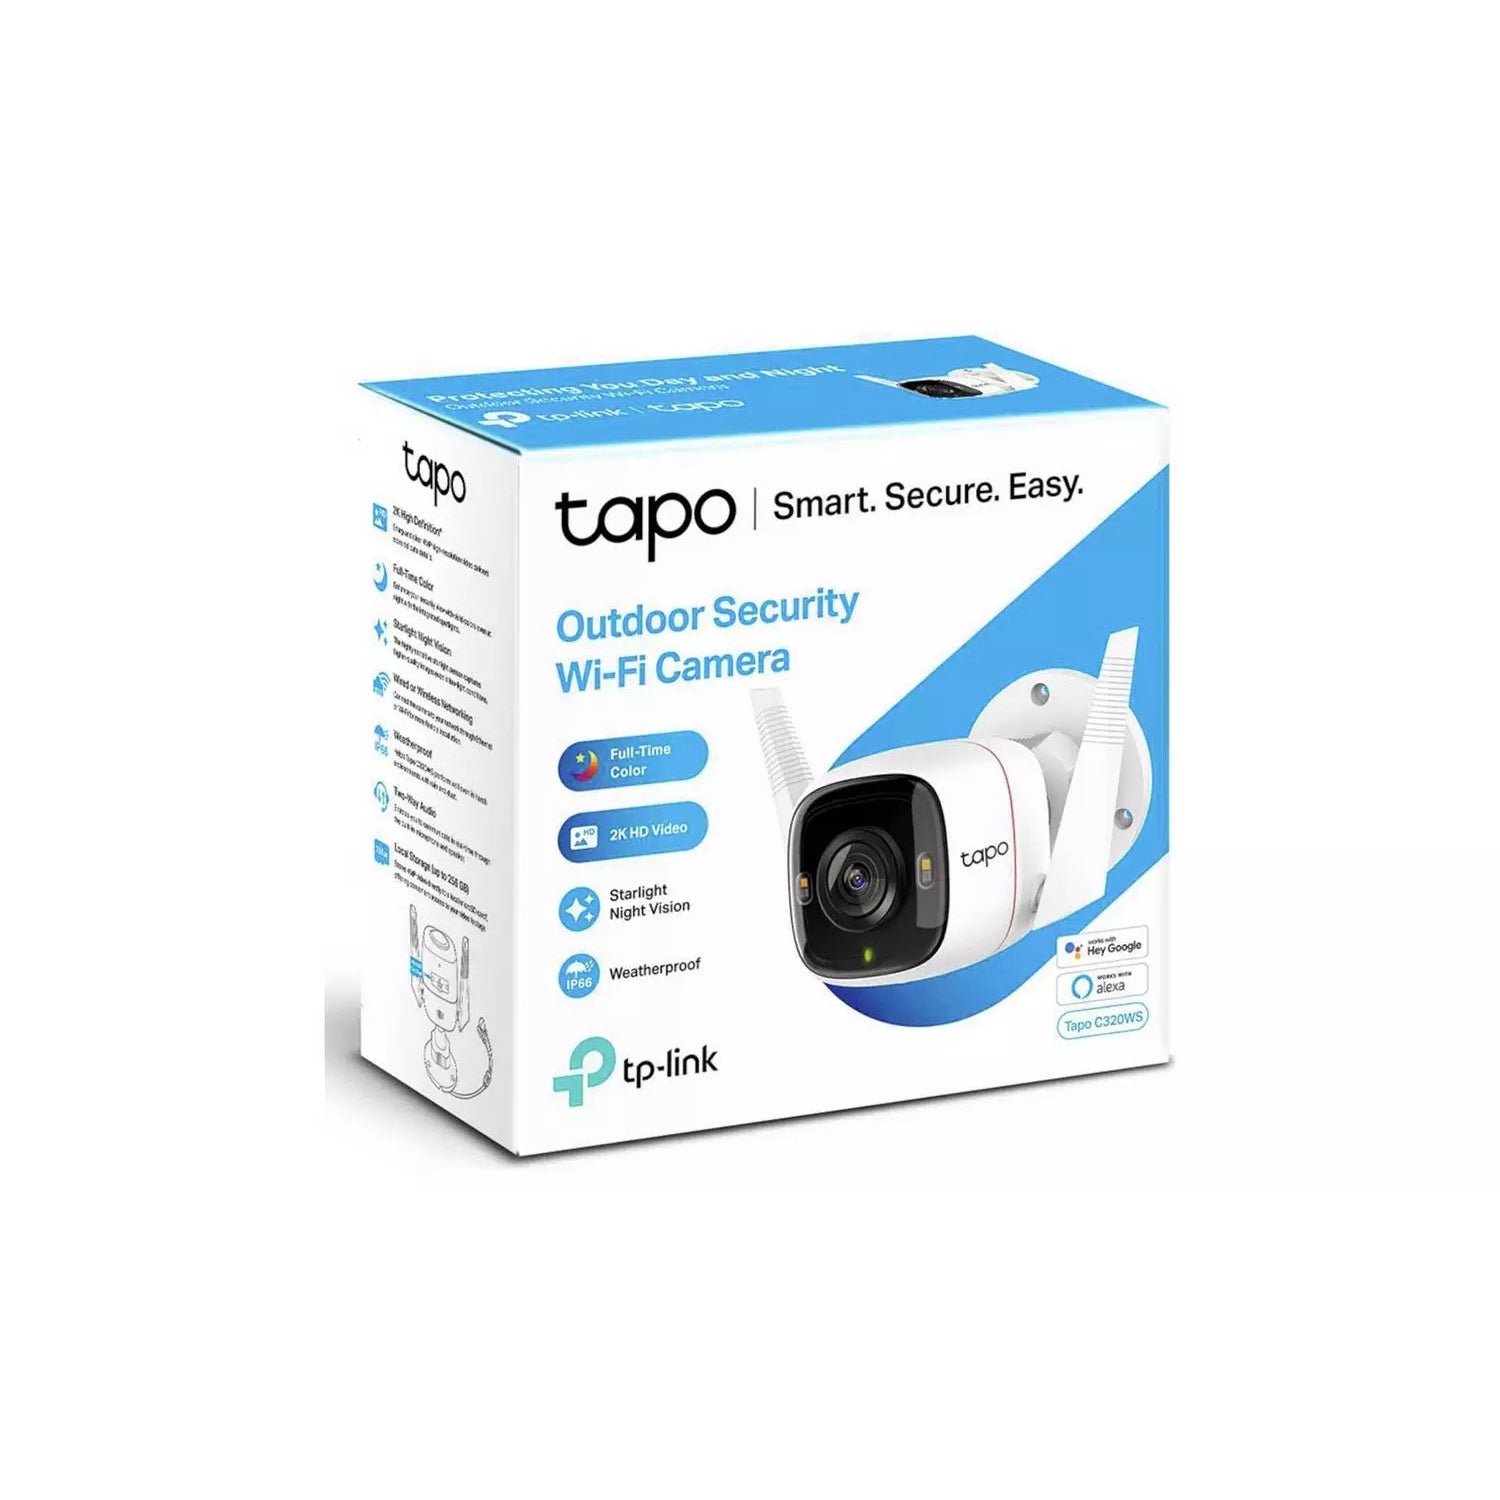 TP-Link Tapo C320WS 2KHD Smart Wi-Fi Outdoor Security Camera - Refurbished Excellent